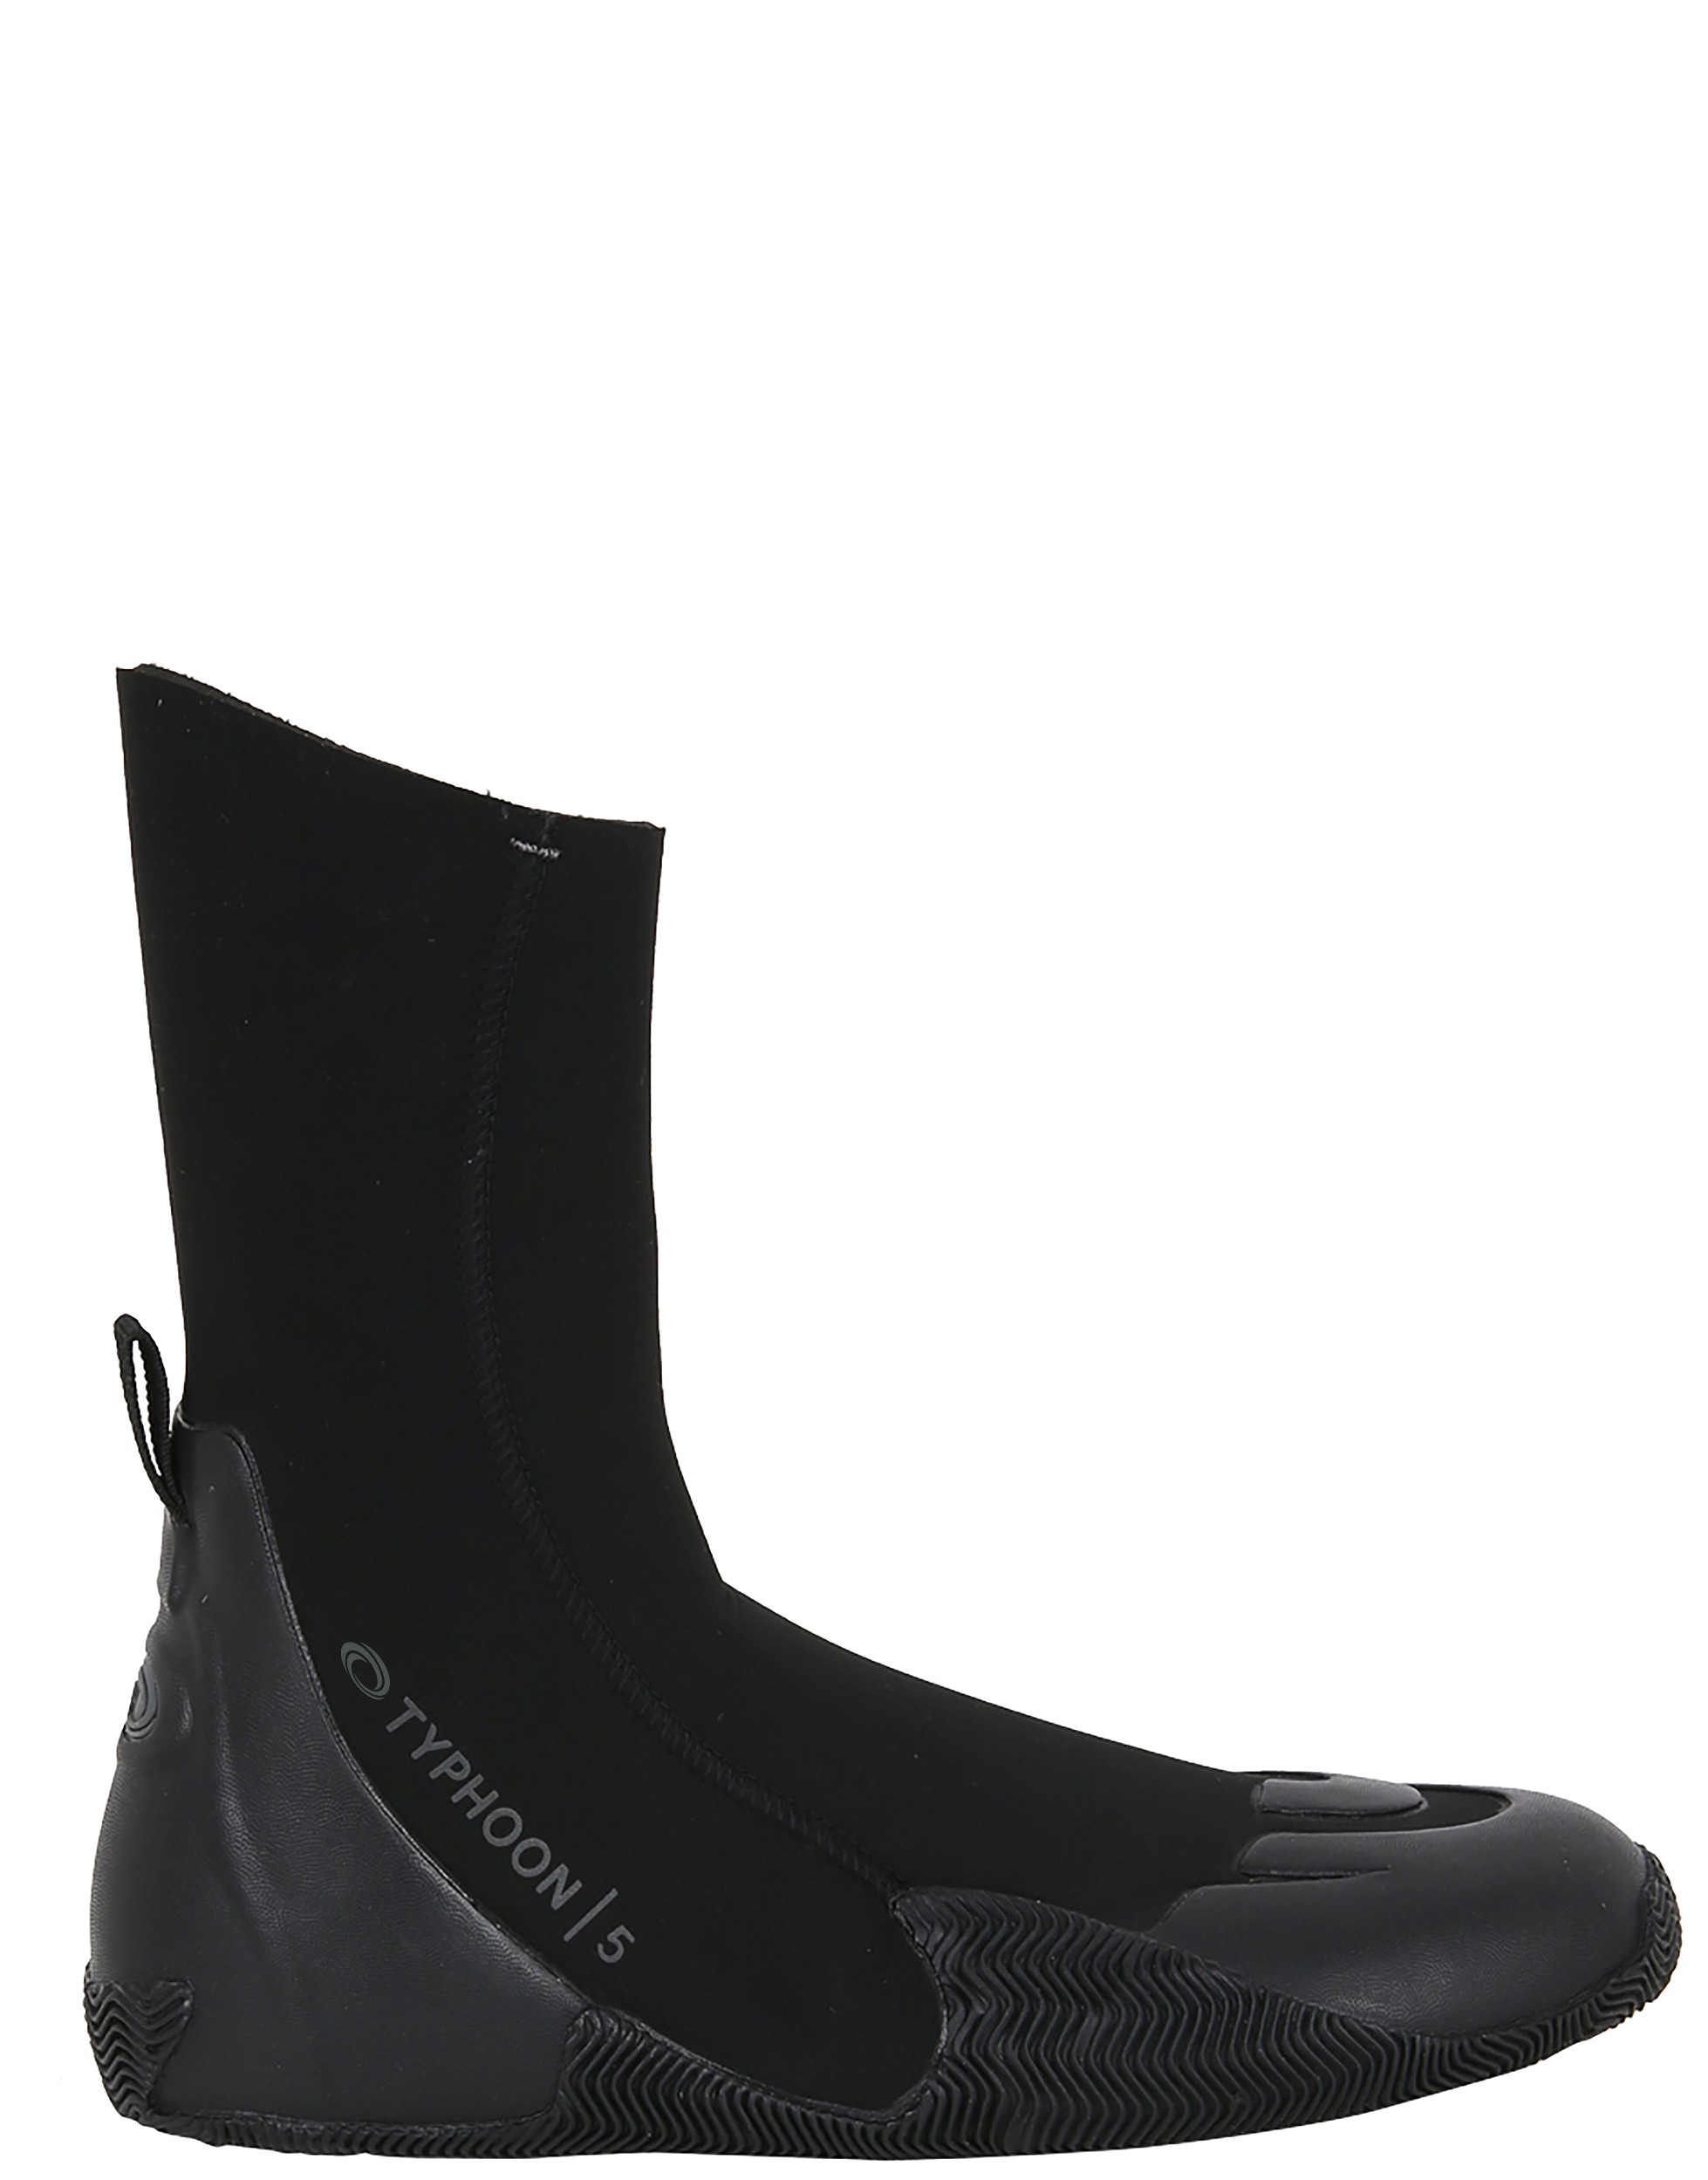 The Typhoon Ventnor5 Boot combines quality and durability using a 5mm neoprene, making it a perfect choice for year-round use, for virtually any watersport where warmth and flexibility are key.